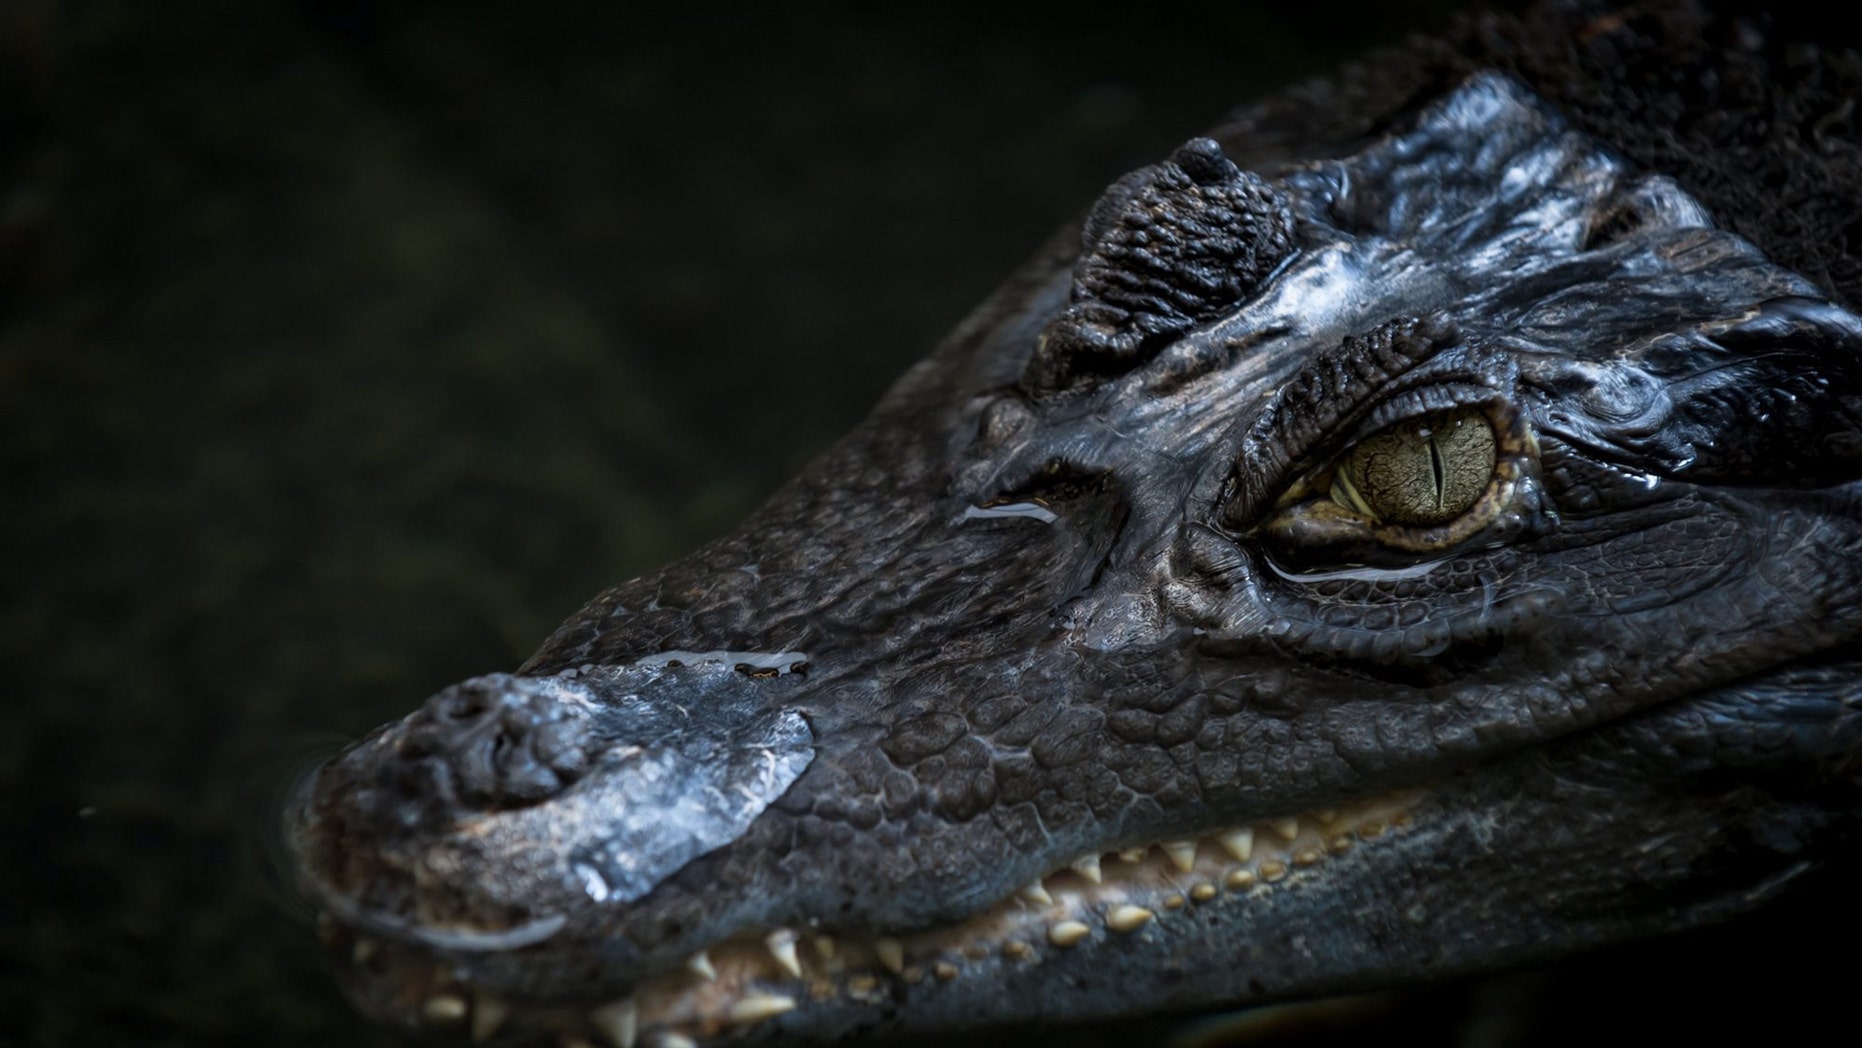 Ancient crocodiles had vegetarian cousins that roamed the planet 200 million years ago, research shows. (Credit: SWNS)